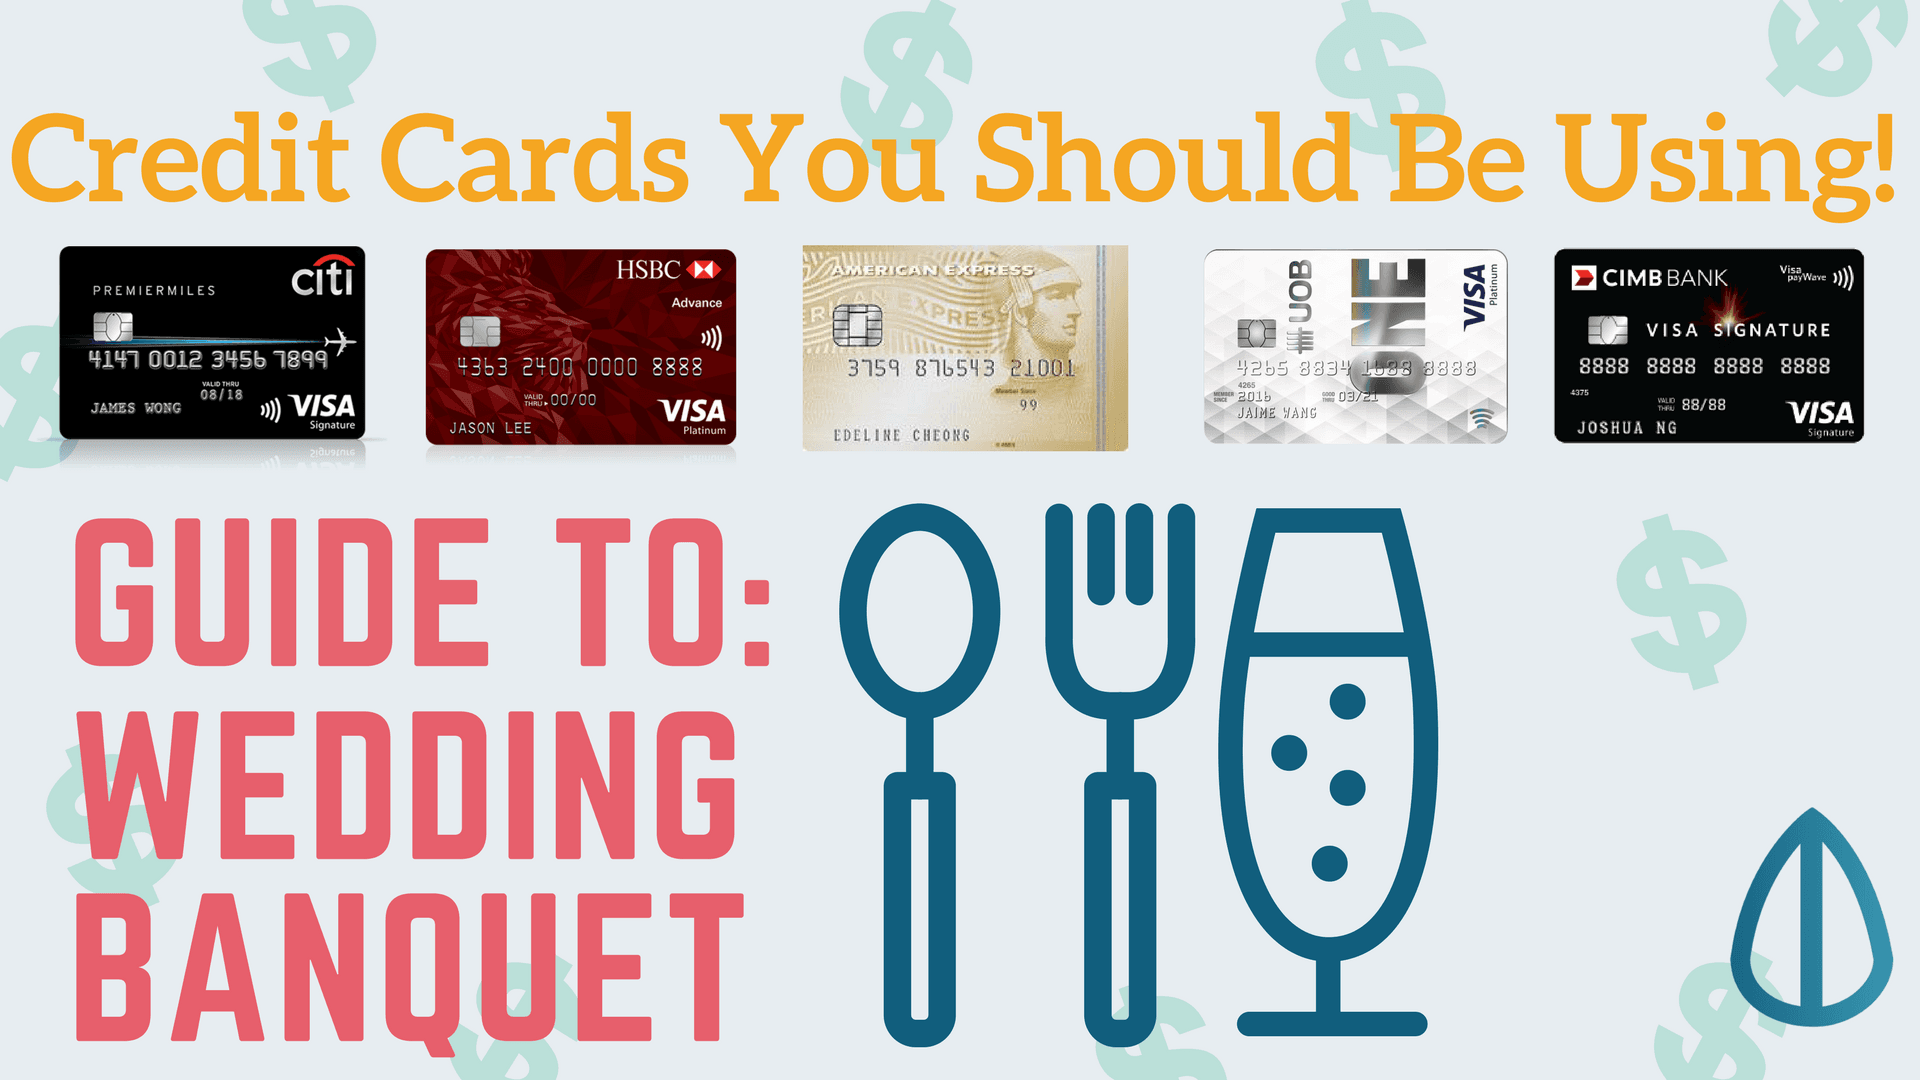 Credit cards to use for wedding